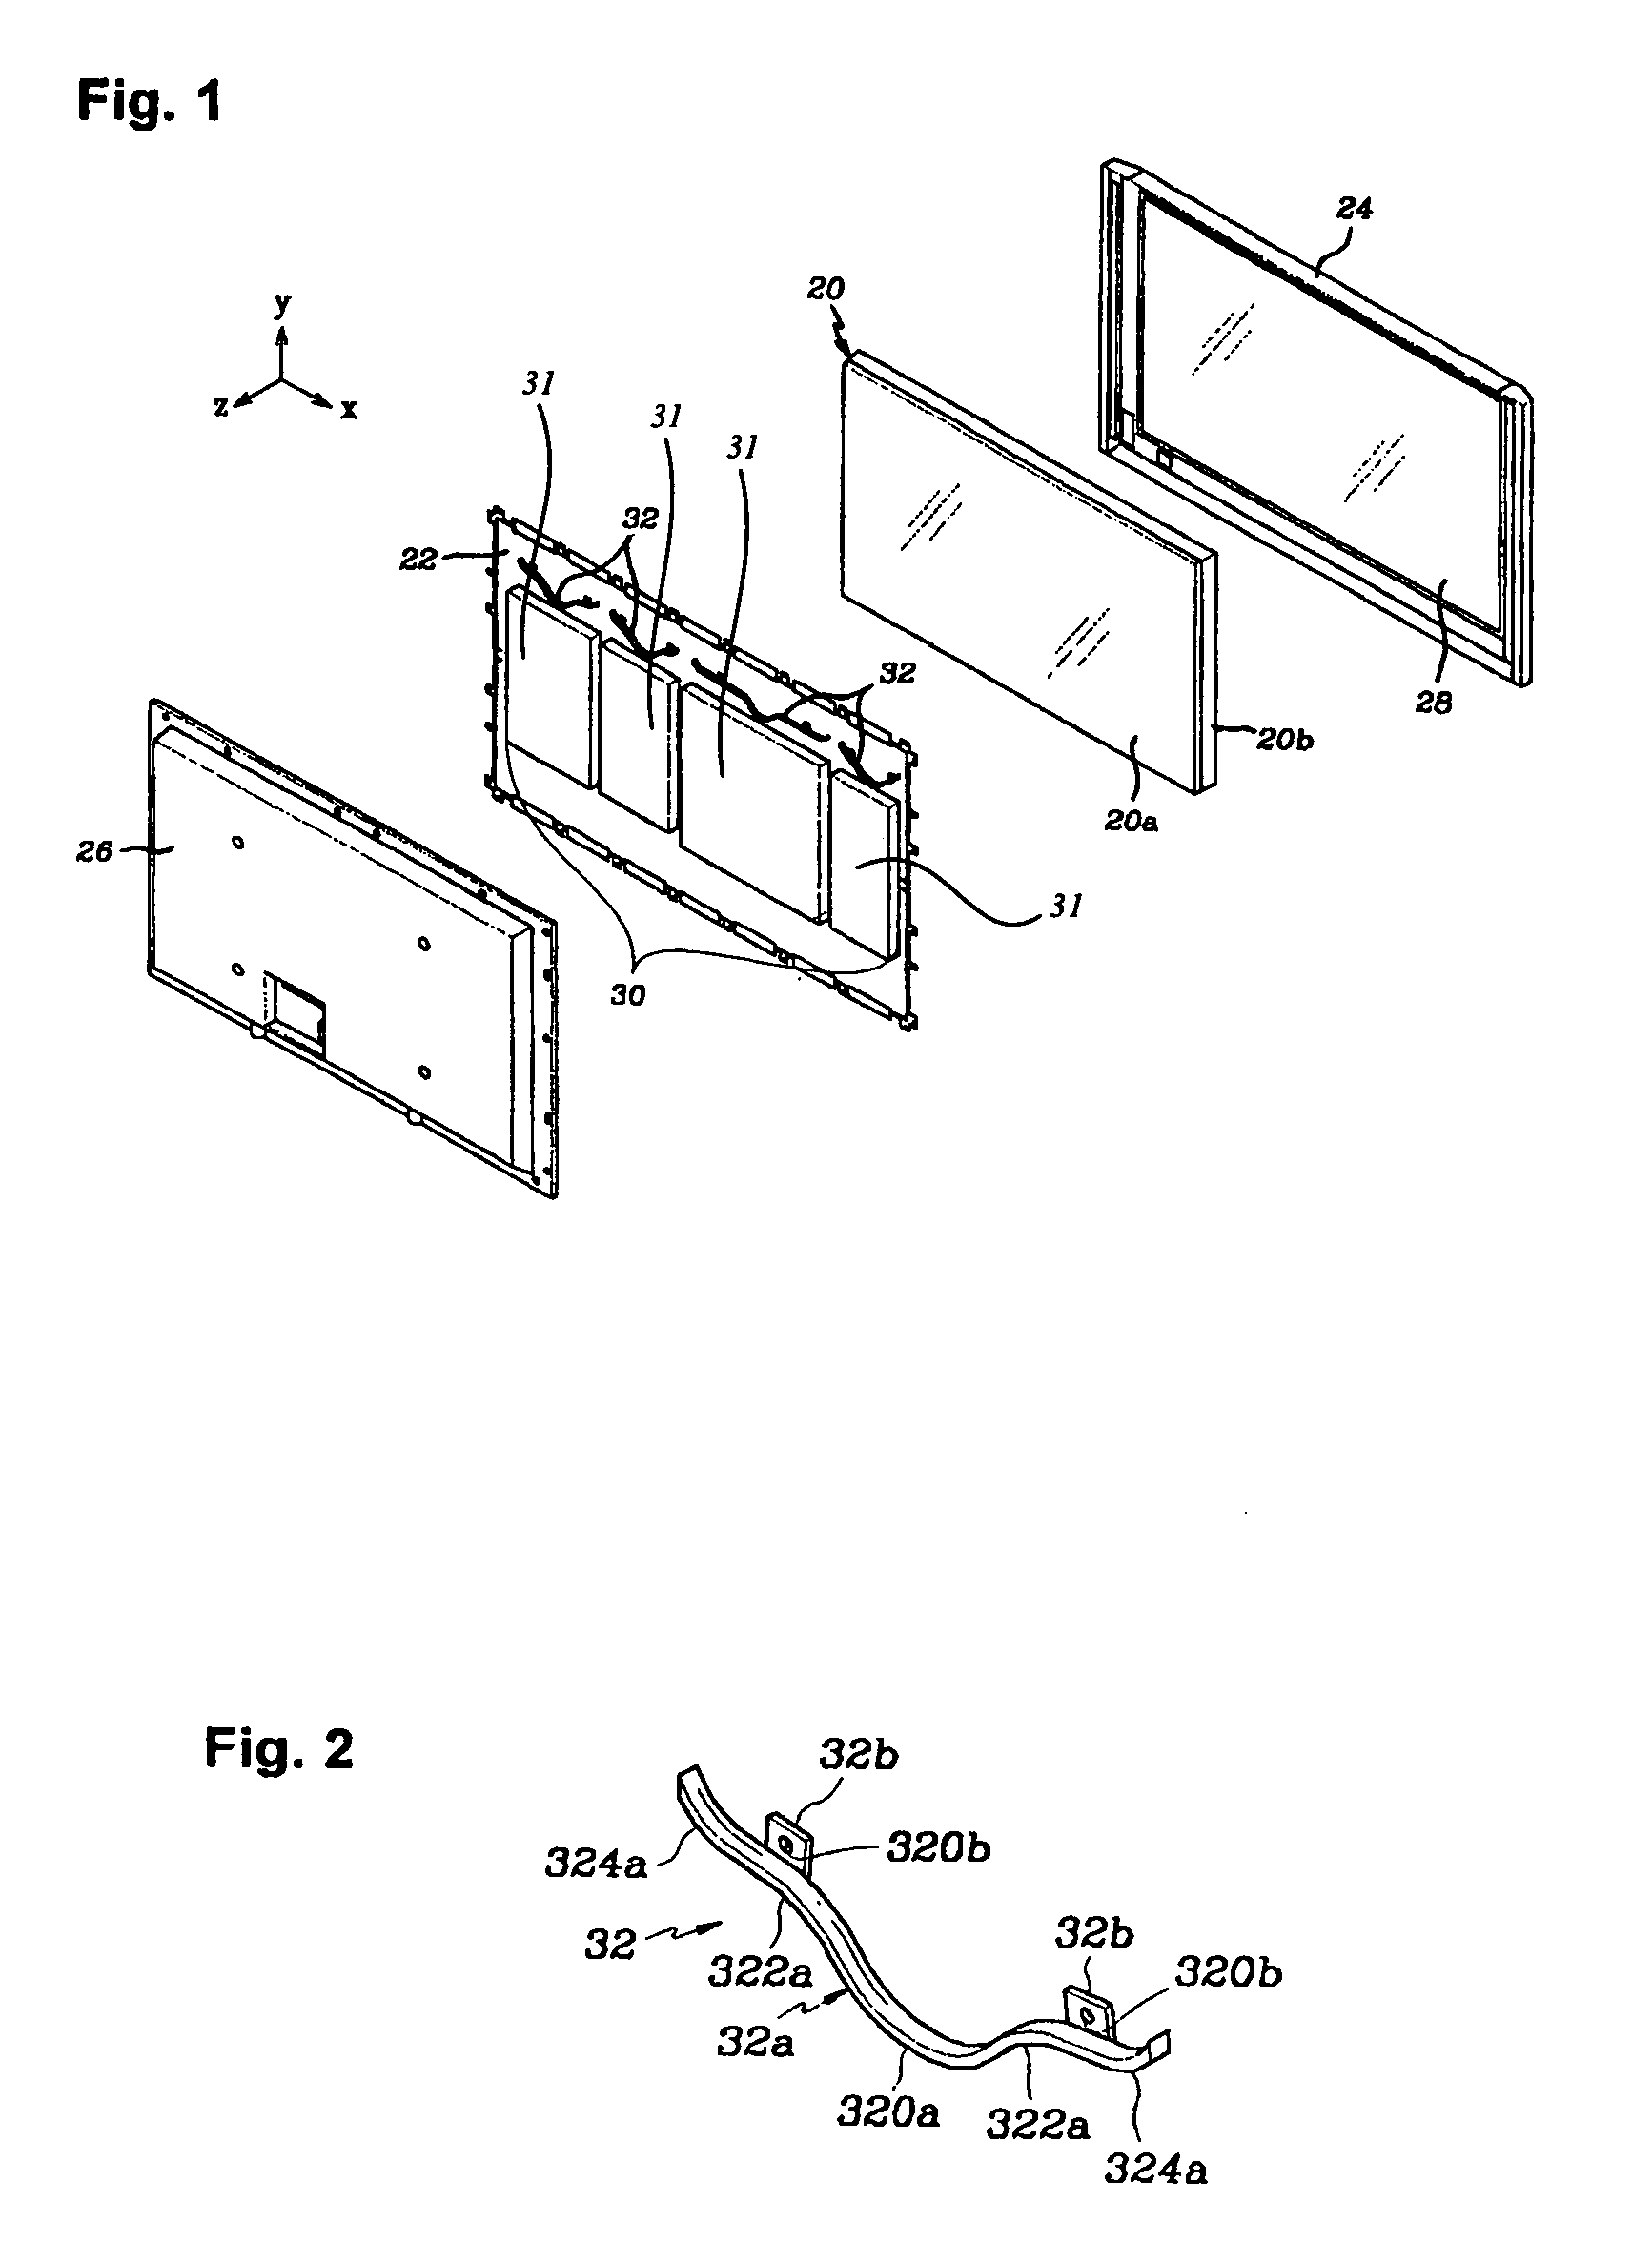 Passive apparatus that regulates a flow of heated air within a plasma display device